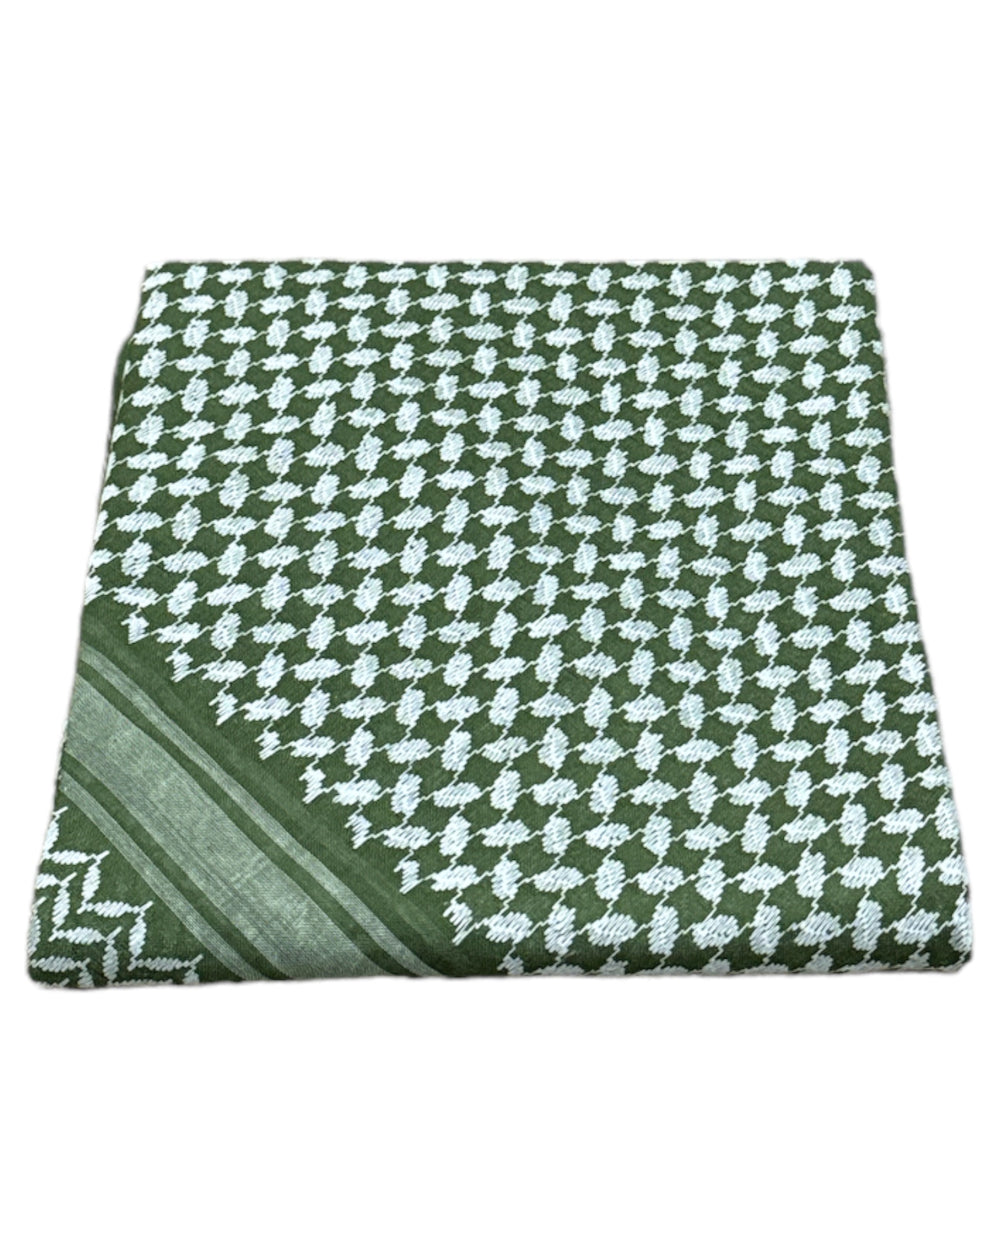 Olive Green & White Keffiyeh Shemagh